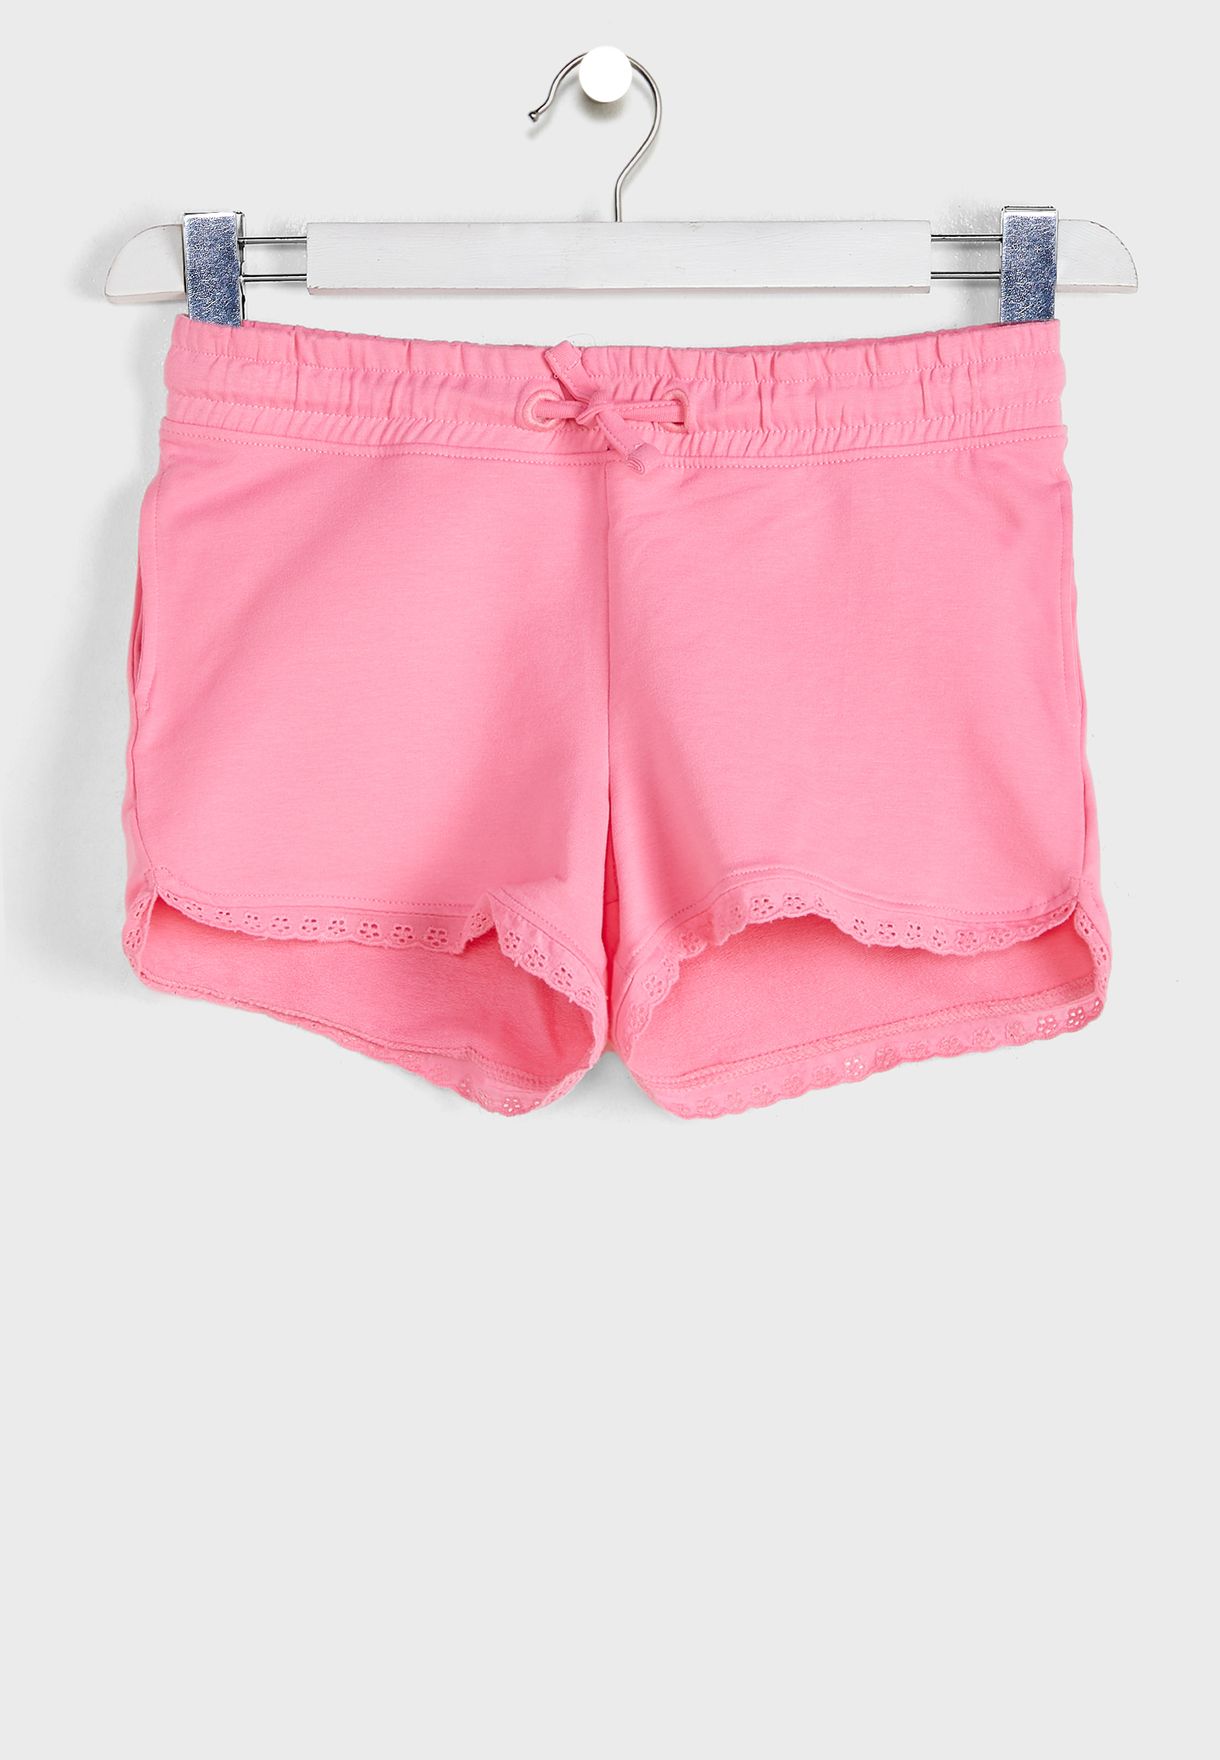 Kids 2 Pack Assorted Shorts